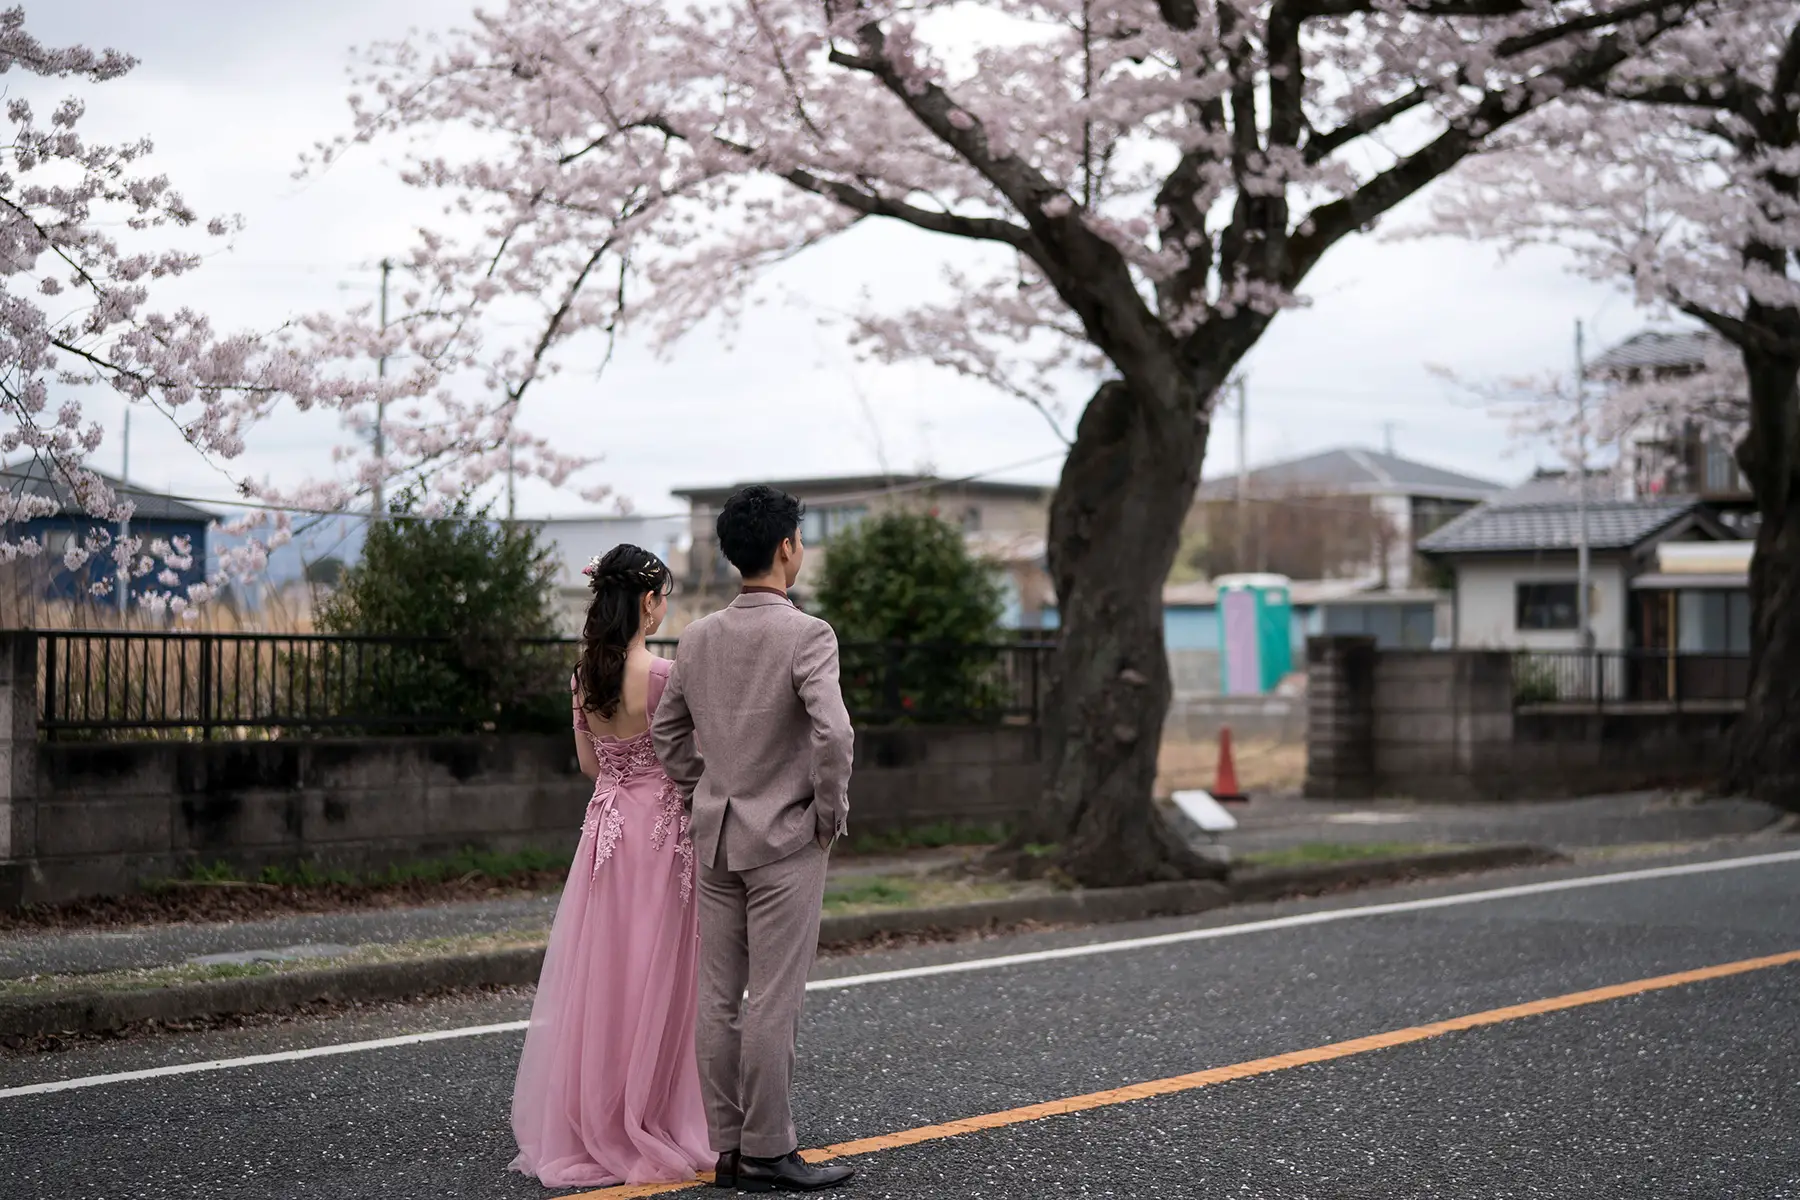 A couple in a grey suit and a pink dress standing for photos under a cherry blossom tree.